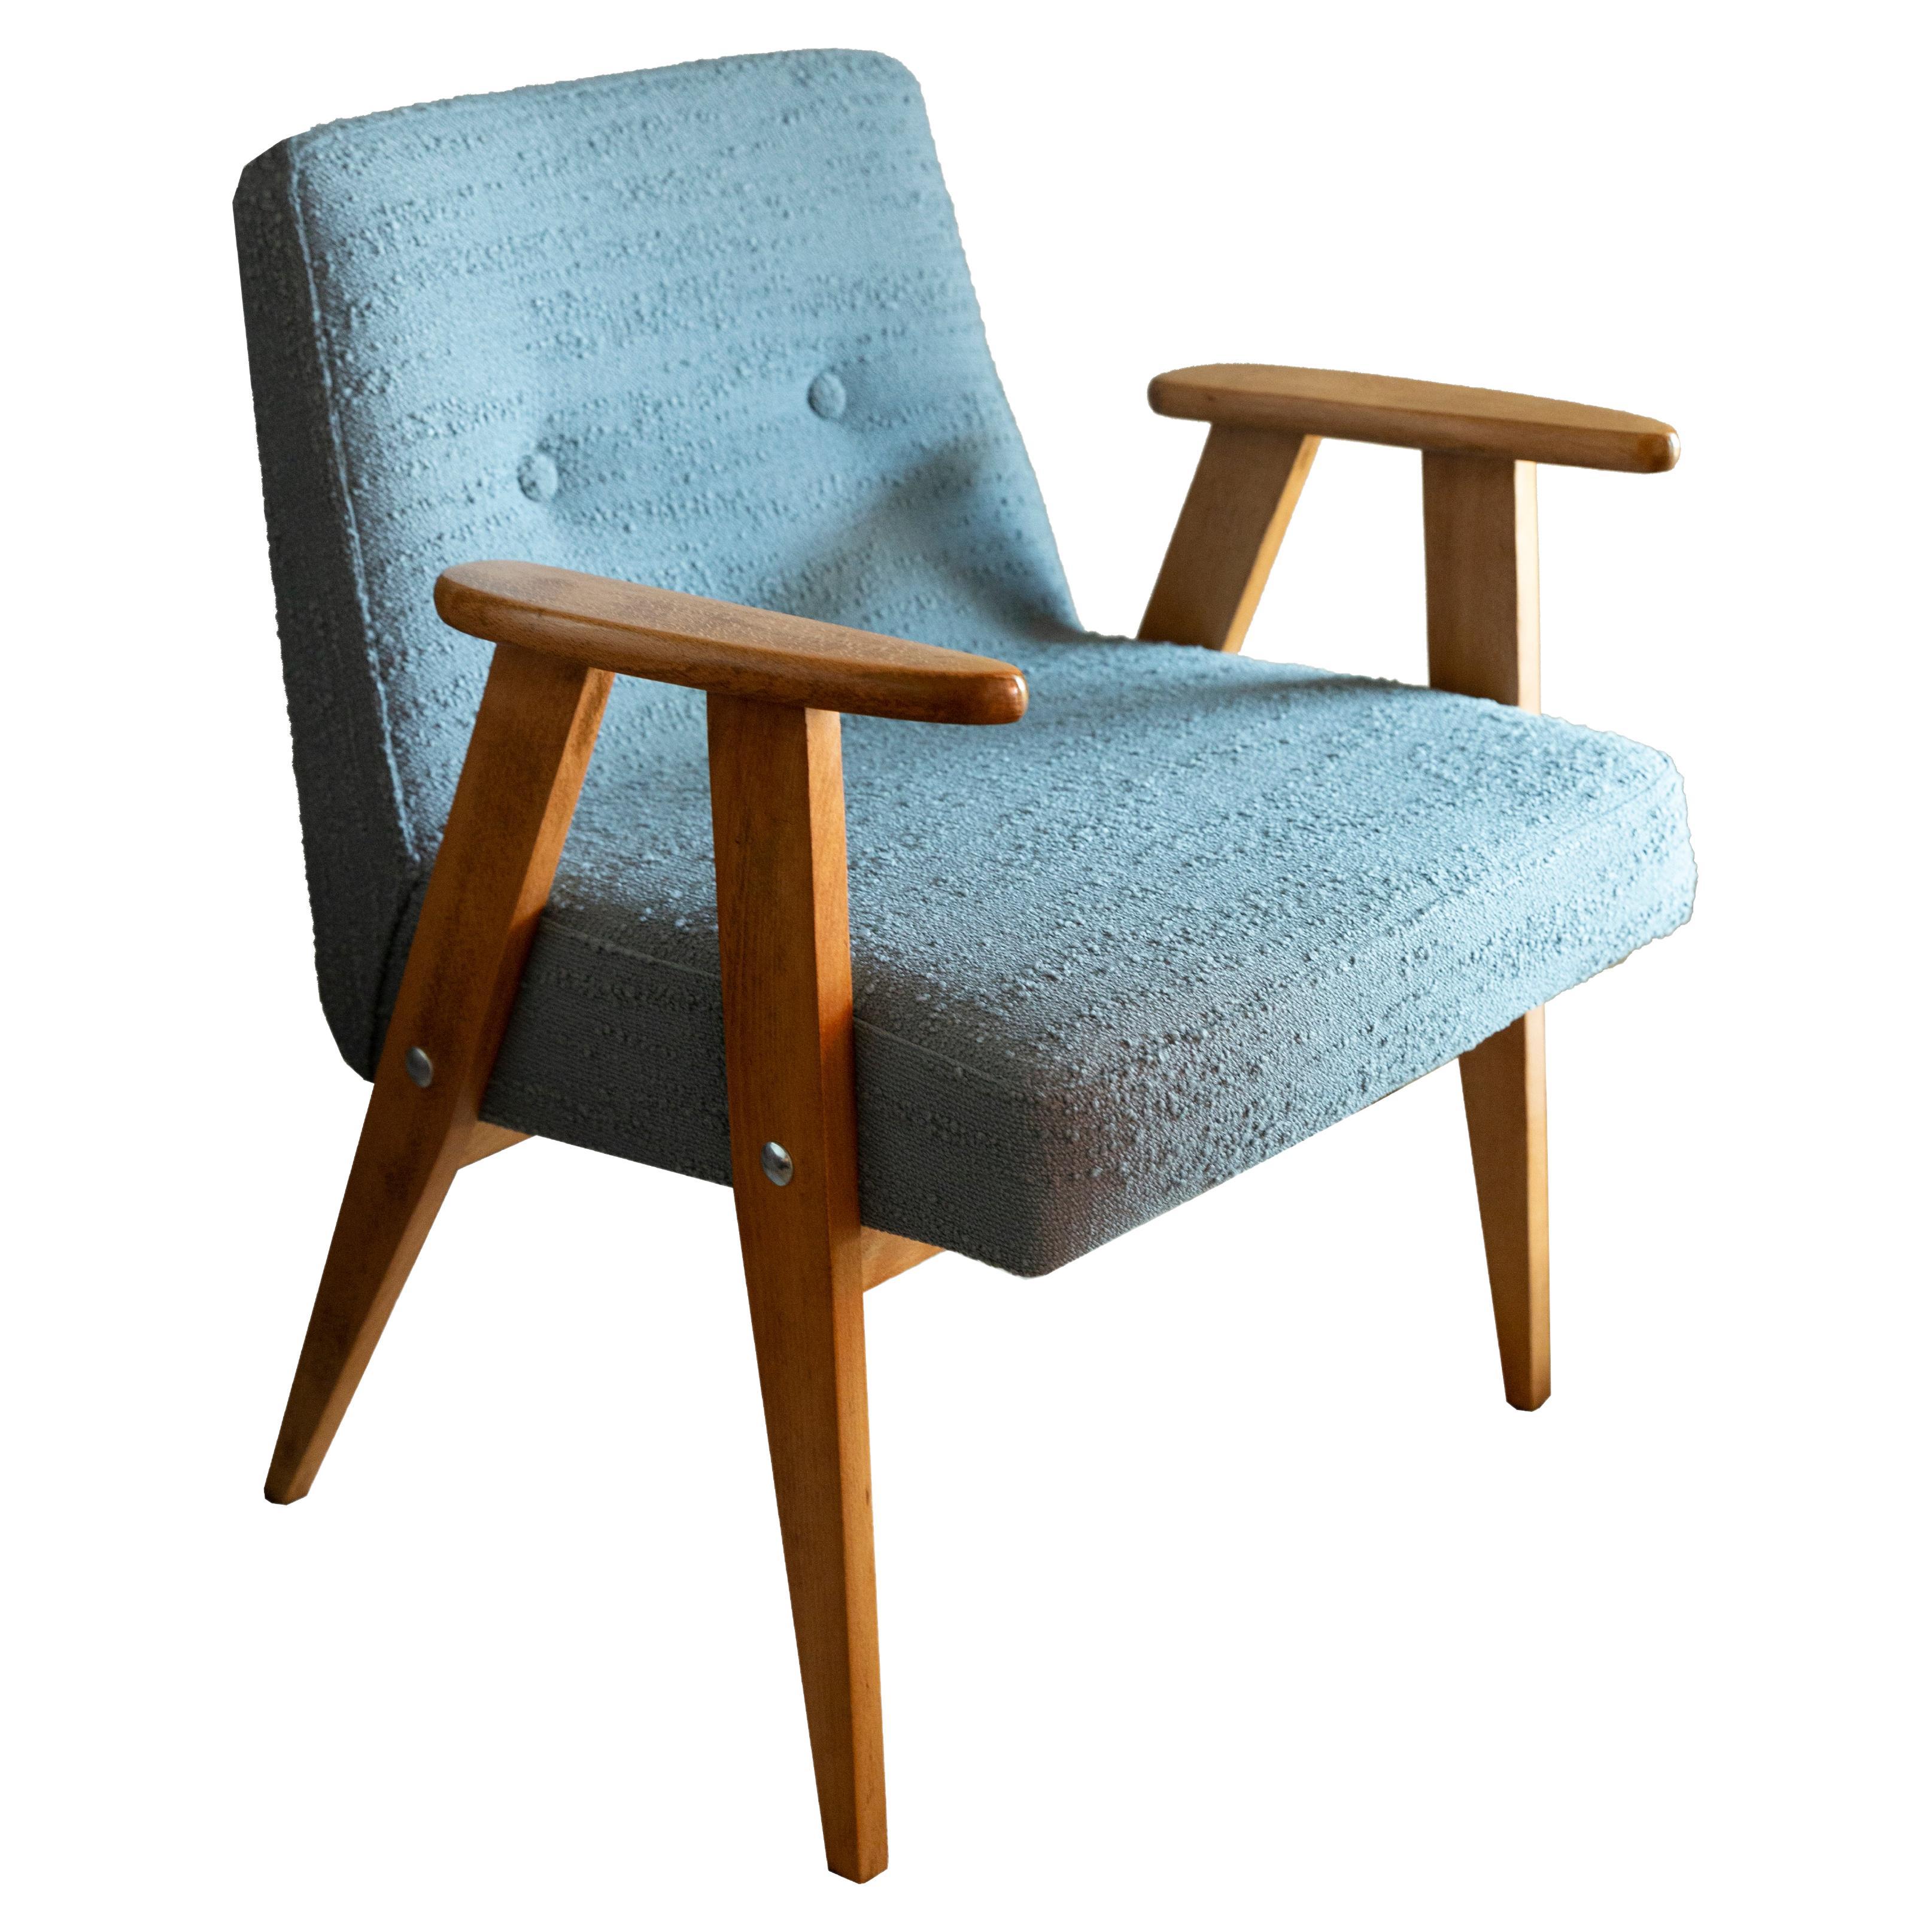 Midcentury 366 Club Armchair in Gray Blue Boucle, J. Chierowski, Europe, 1960s For Sale